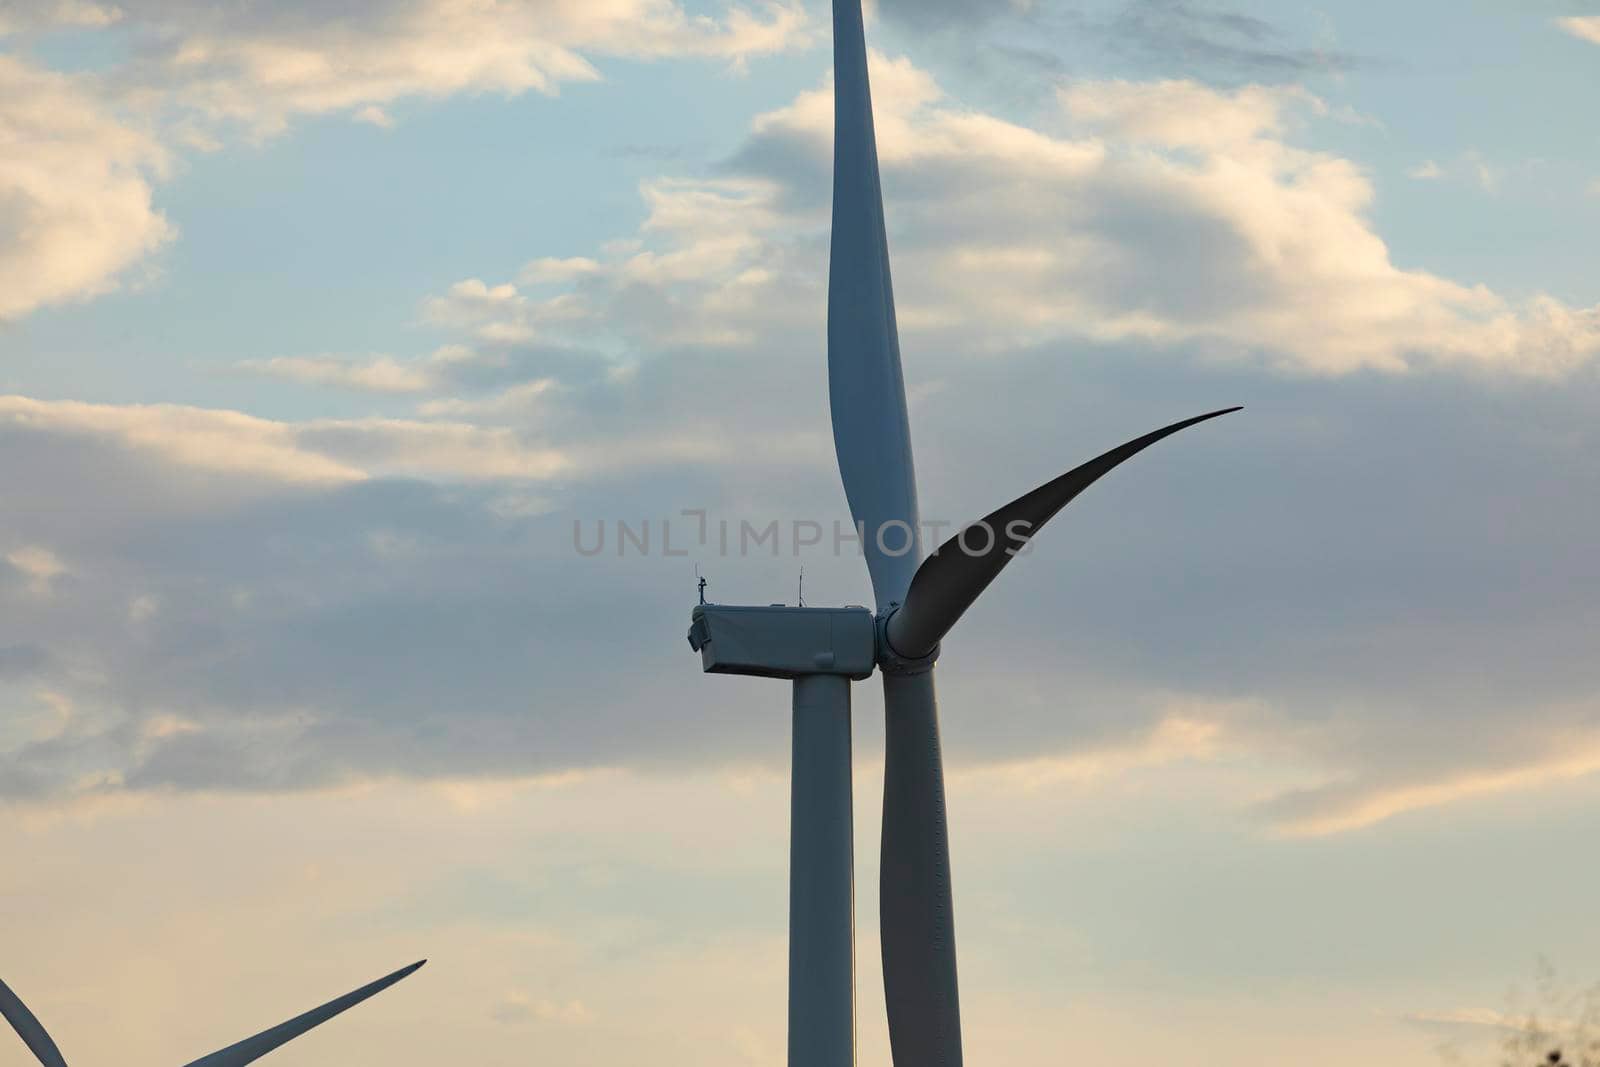 New wind turbine, recently installed in north of Spain, rotates with the wind at sunset, community of Aragon.